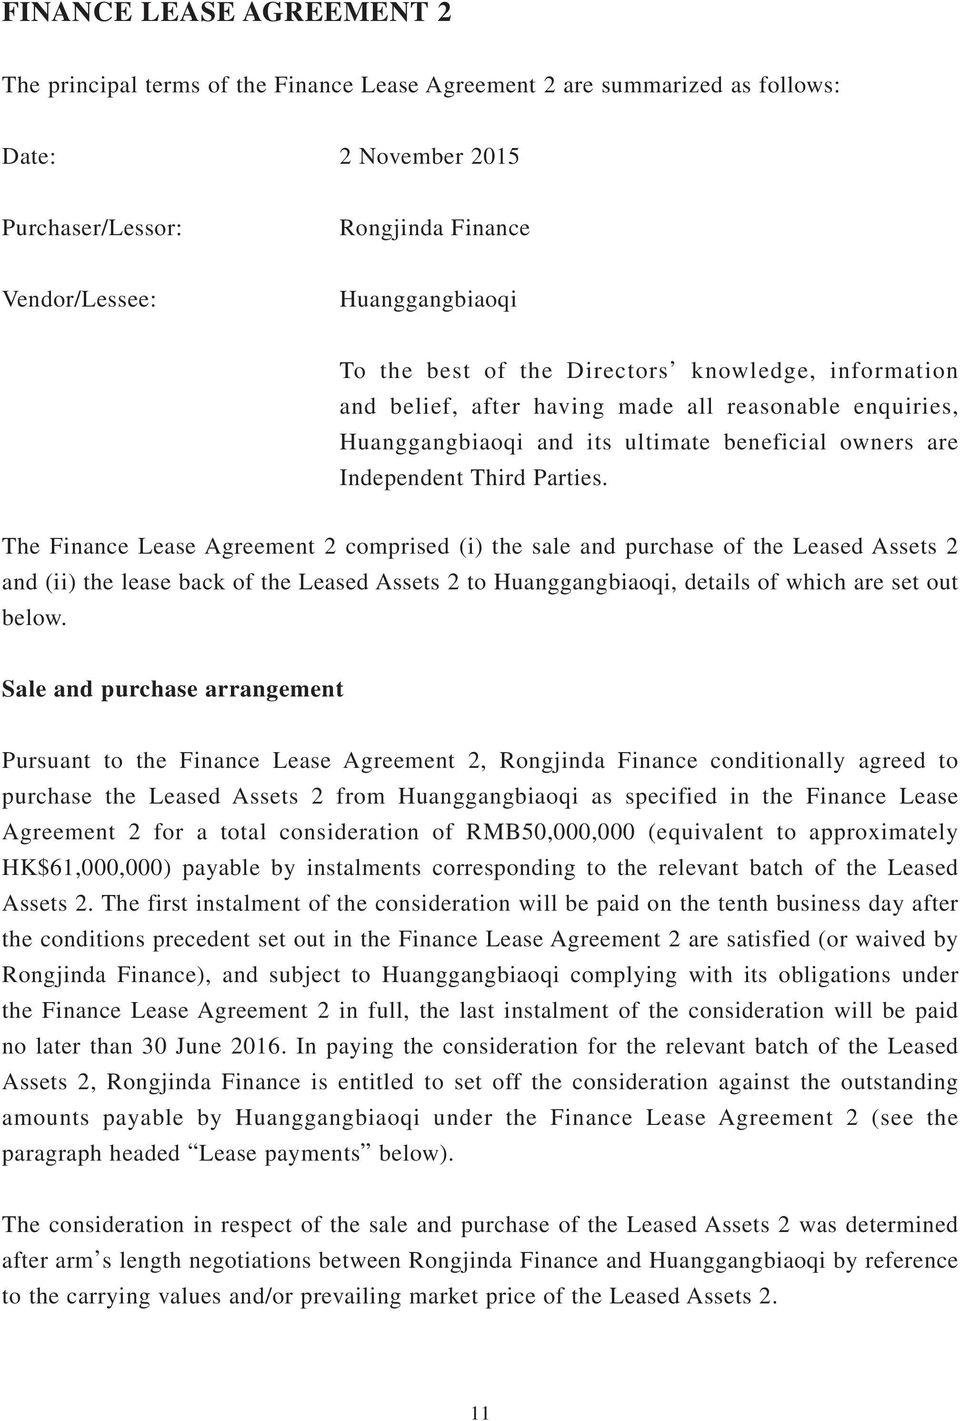 The Finance Lease Agreement 2 comprised (i) the sale and purchase of the Leased Assets 2 and (ii) the lease back of the Leased Assets 2 to Huanggangbiaoqi, details of which are set out below.